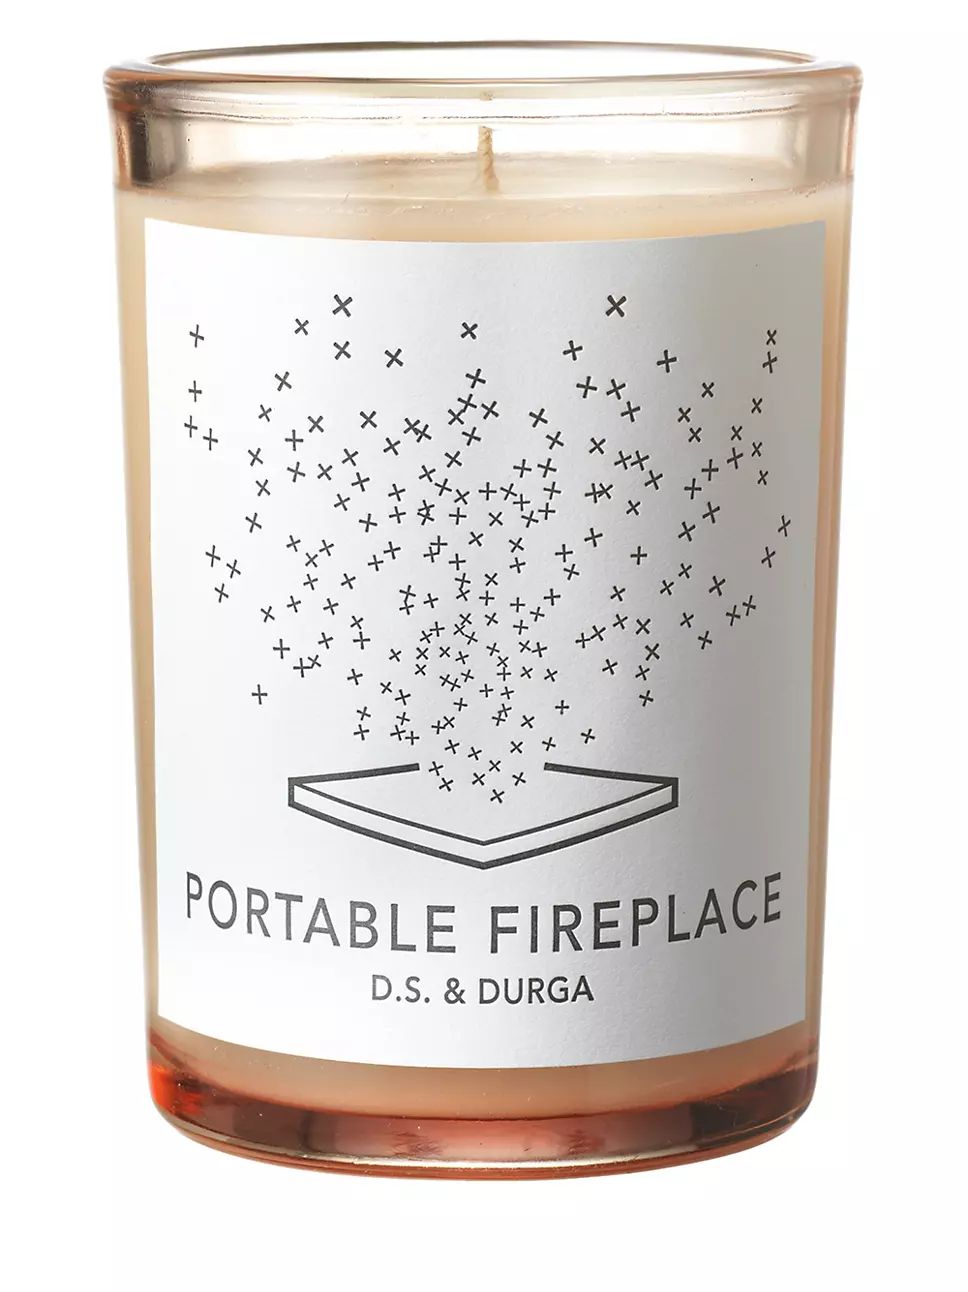 D.S. & Durga Portable Fireplace Candle | Saks Fifth Avenue